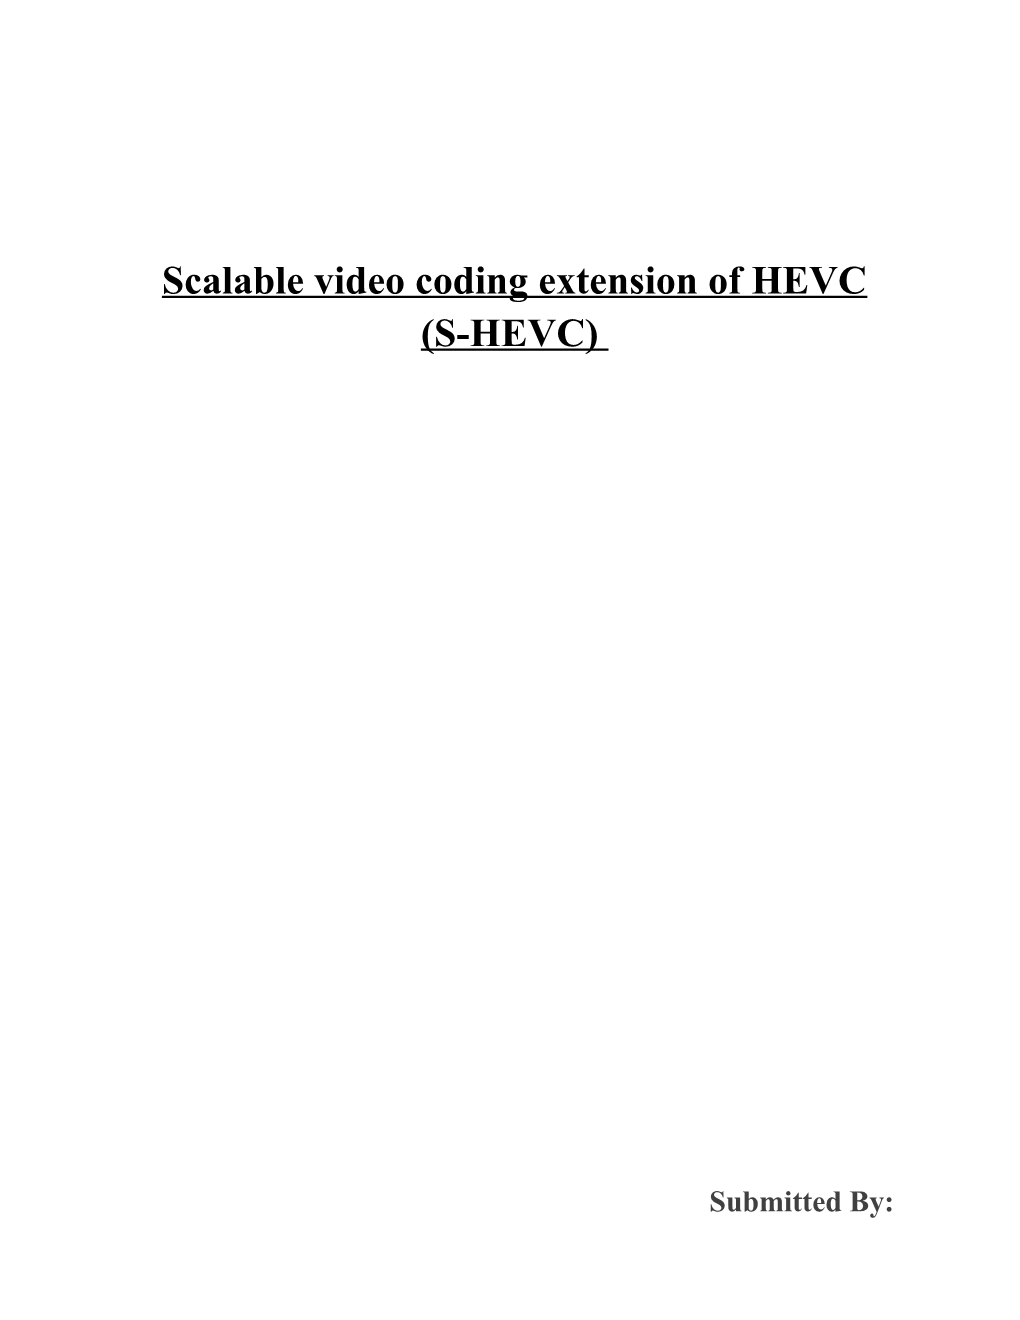 Scalable Video Coding Extension of HEVC (S-HEVC)